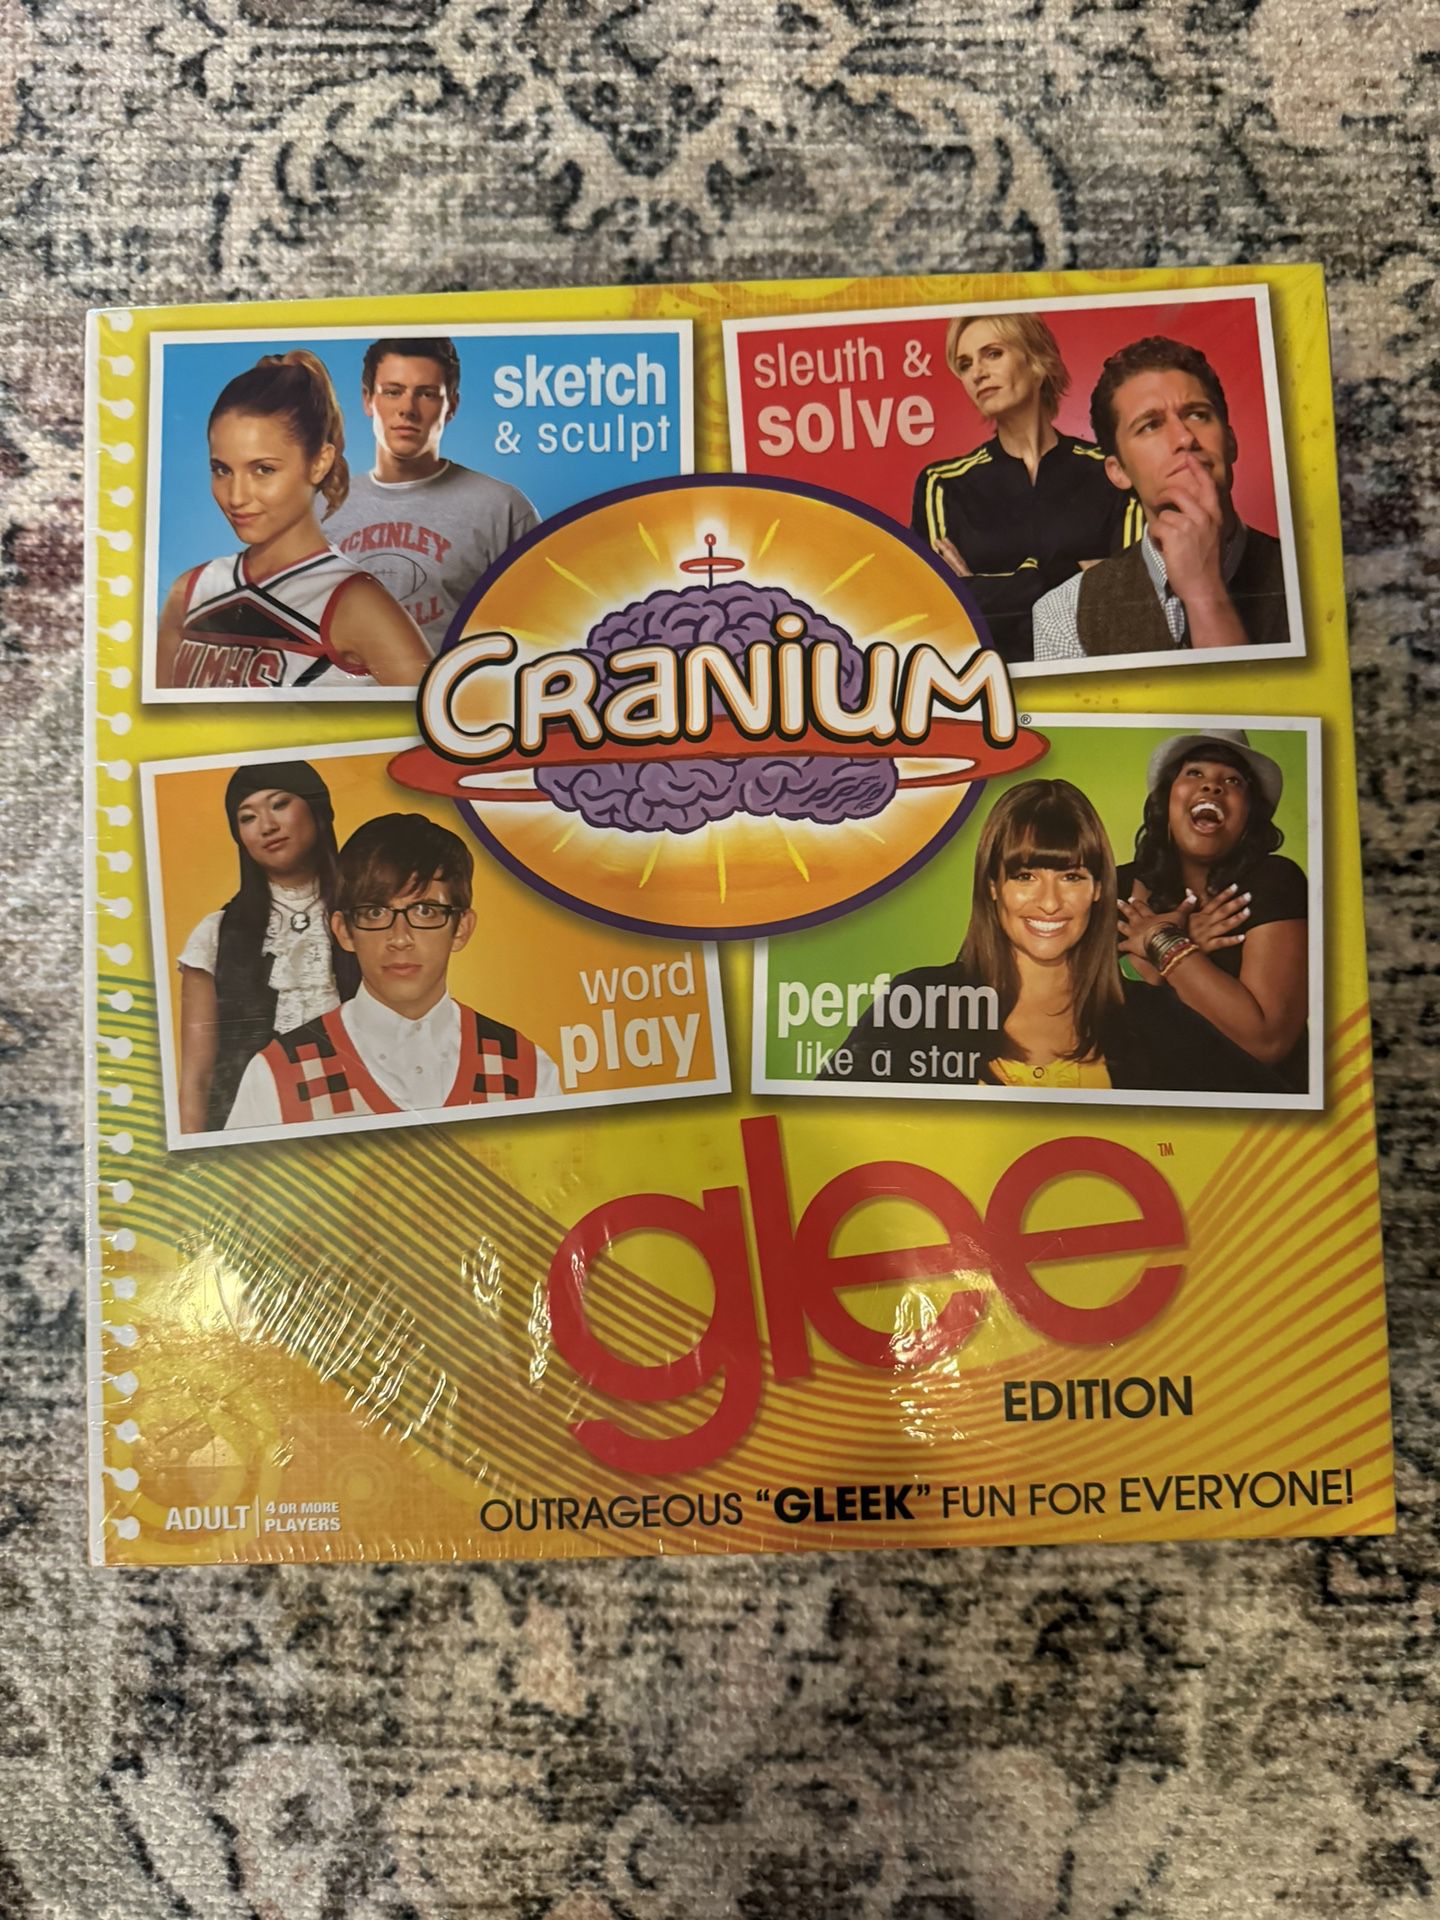 New Glee™ Edition  Cranium New 2011 Sealed Outrageous “GLEEK” Fun For Everyone!